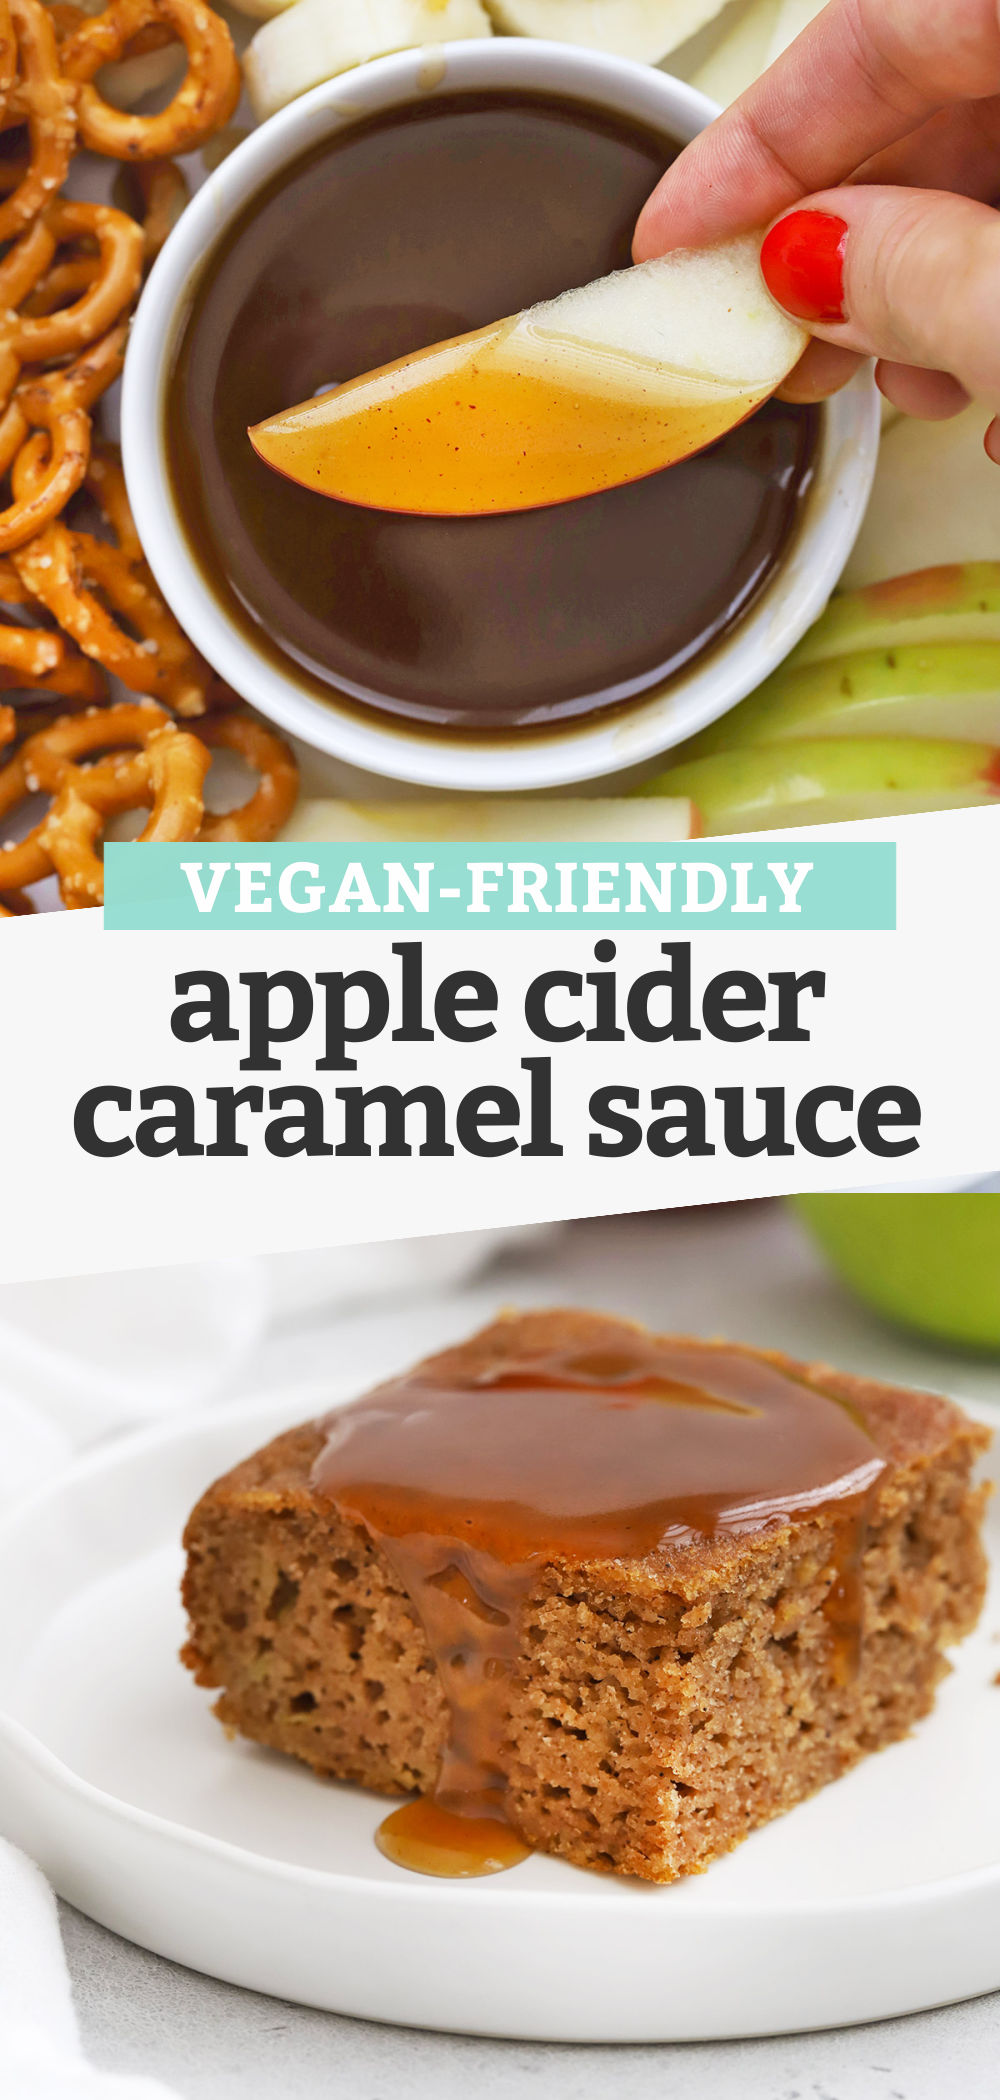 Collage of images of apple cider caramel sauce with text overlay that reads "Vegan-Friendly Apple Cider Caramel Sauce"